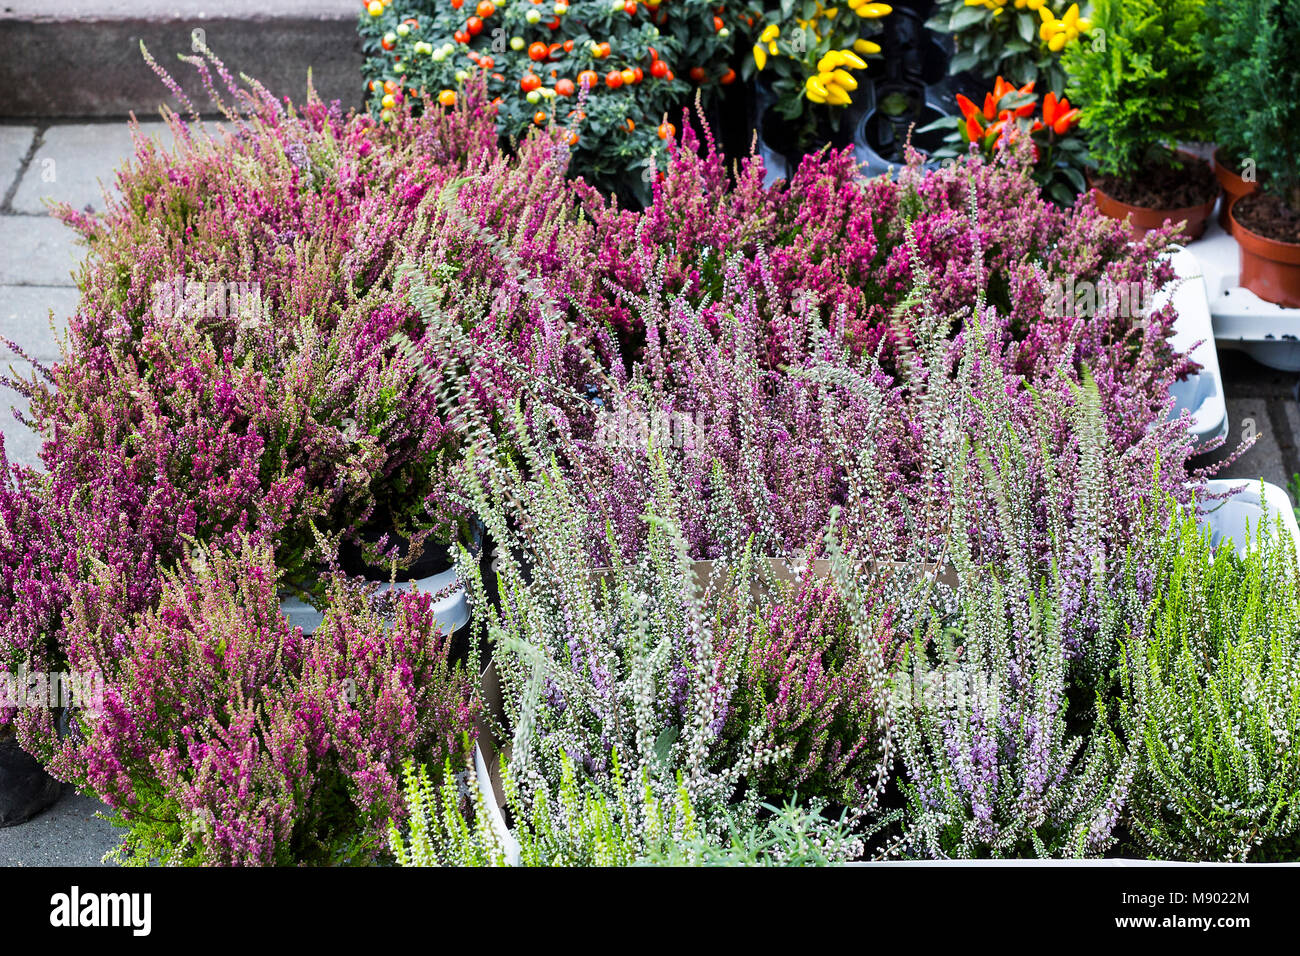 Calluna vulgaris flowers in pots sold in garden center (known as common heather, ling, or simply heather flowering plants). Beautiful pink and purple  Stock Photo